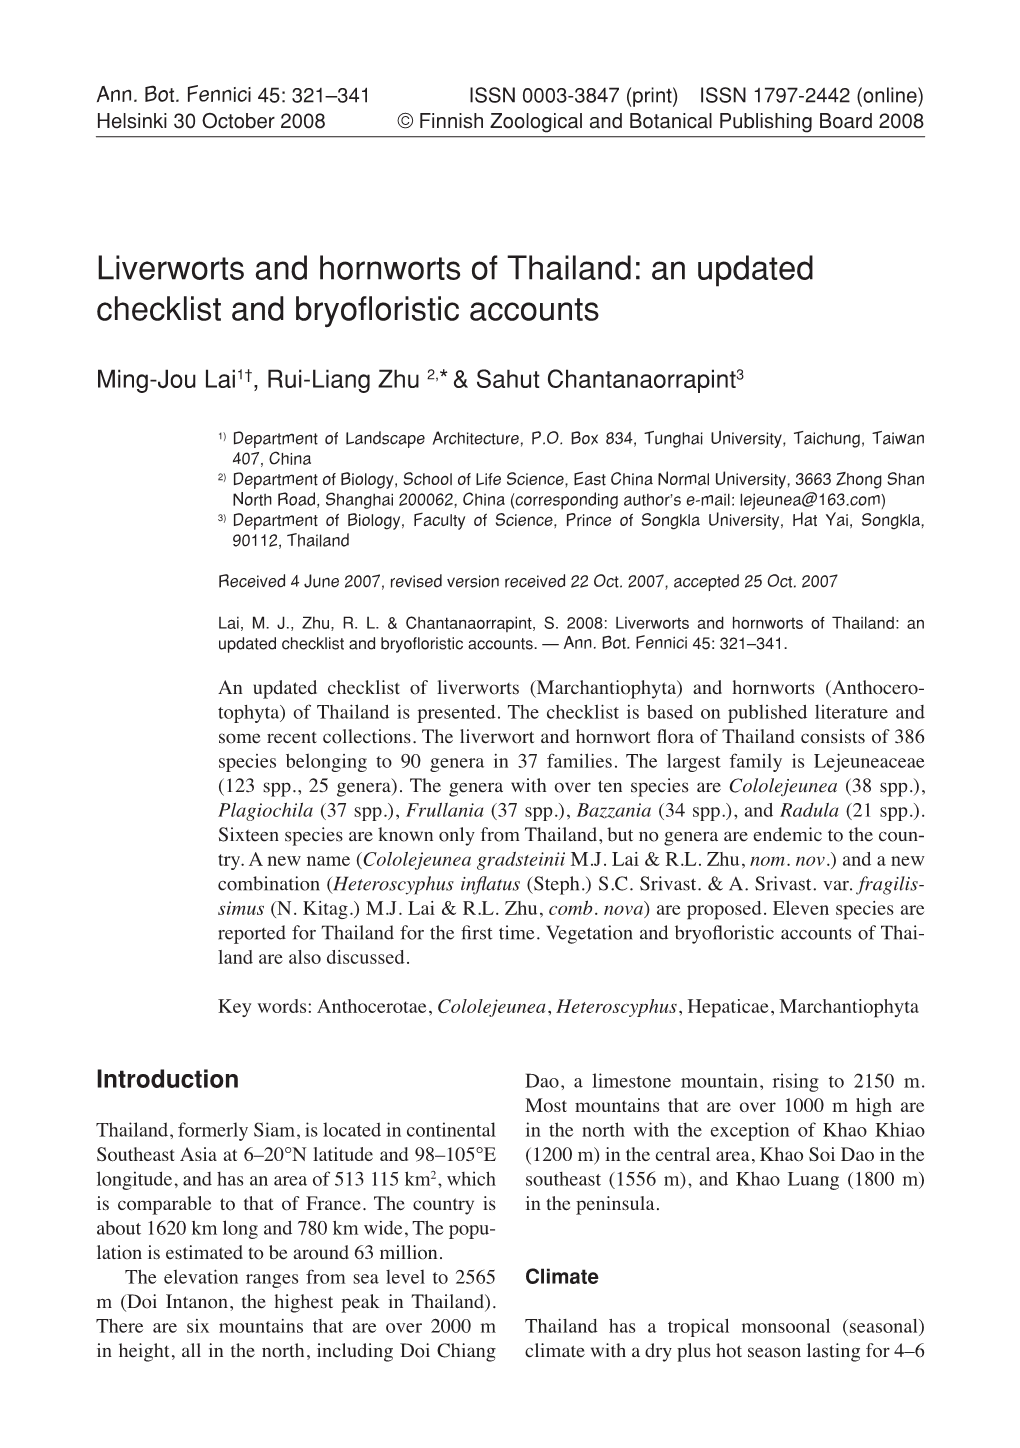 Liverworts and Hornworts of Thailand: an Updated Checklist and Bryofloristic Accounts